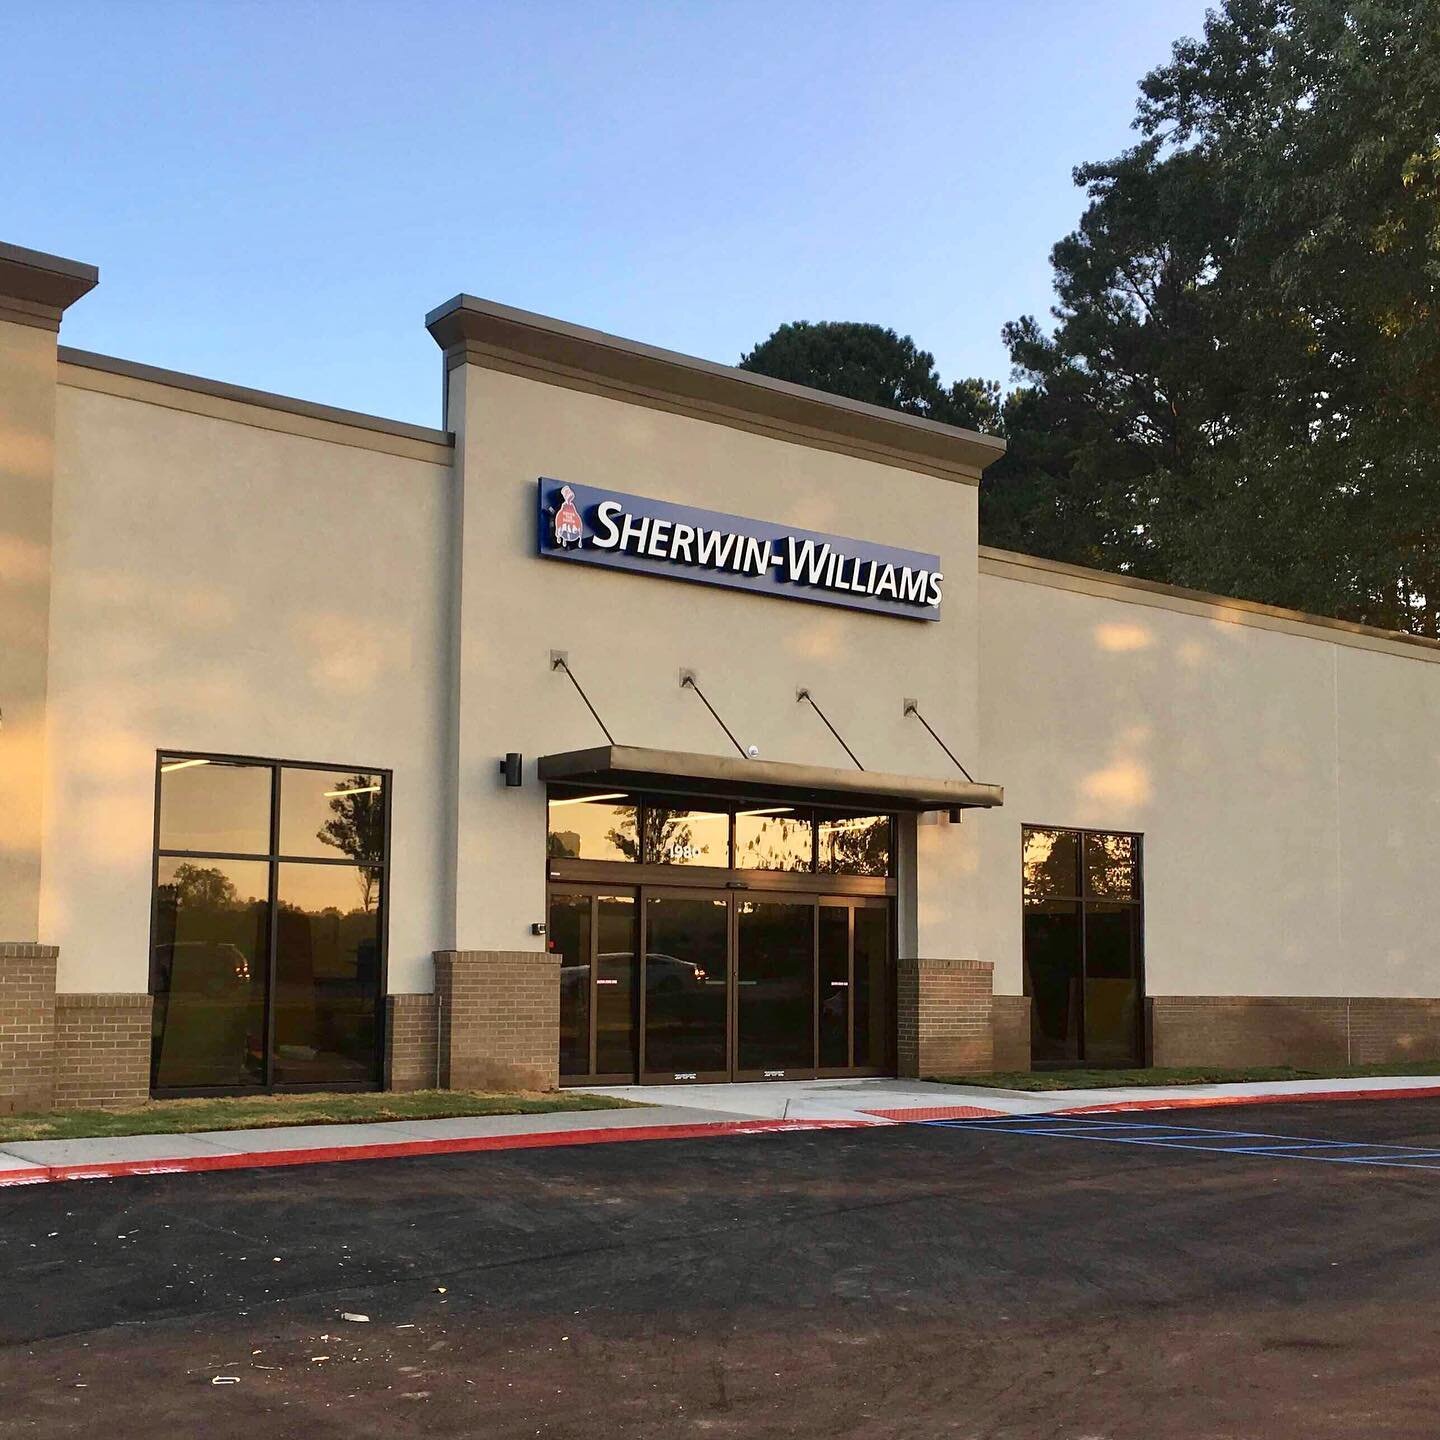 Sherwin Williams in Trussville is complete and open!